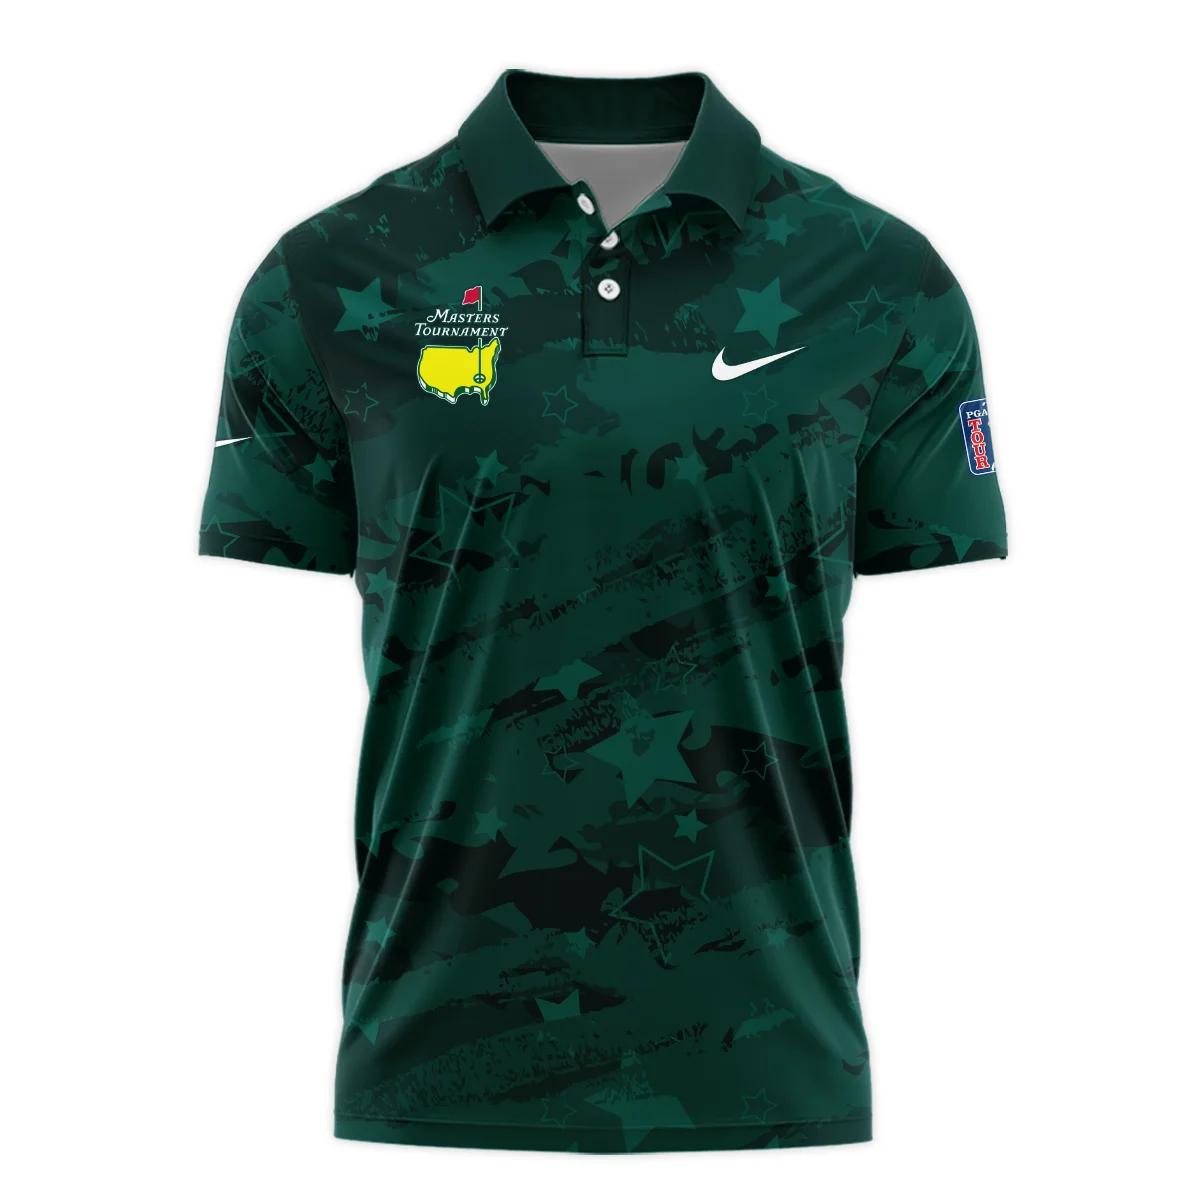 Dark Green Stars Pattern Grunge Background Masters Tournament Nike Vneck Polo Shirt Style Classic Polo Shirt For Men